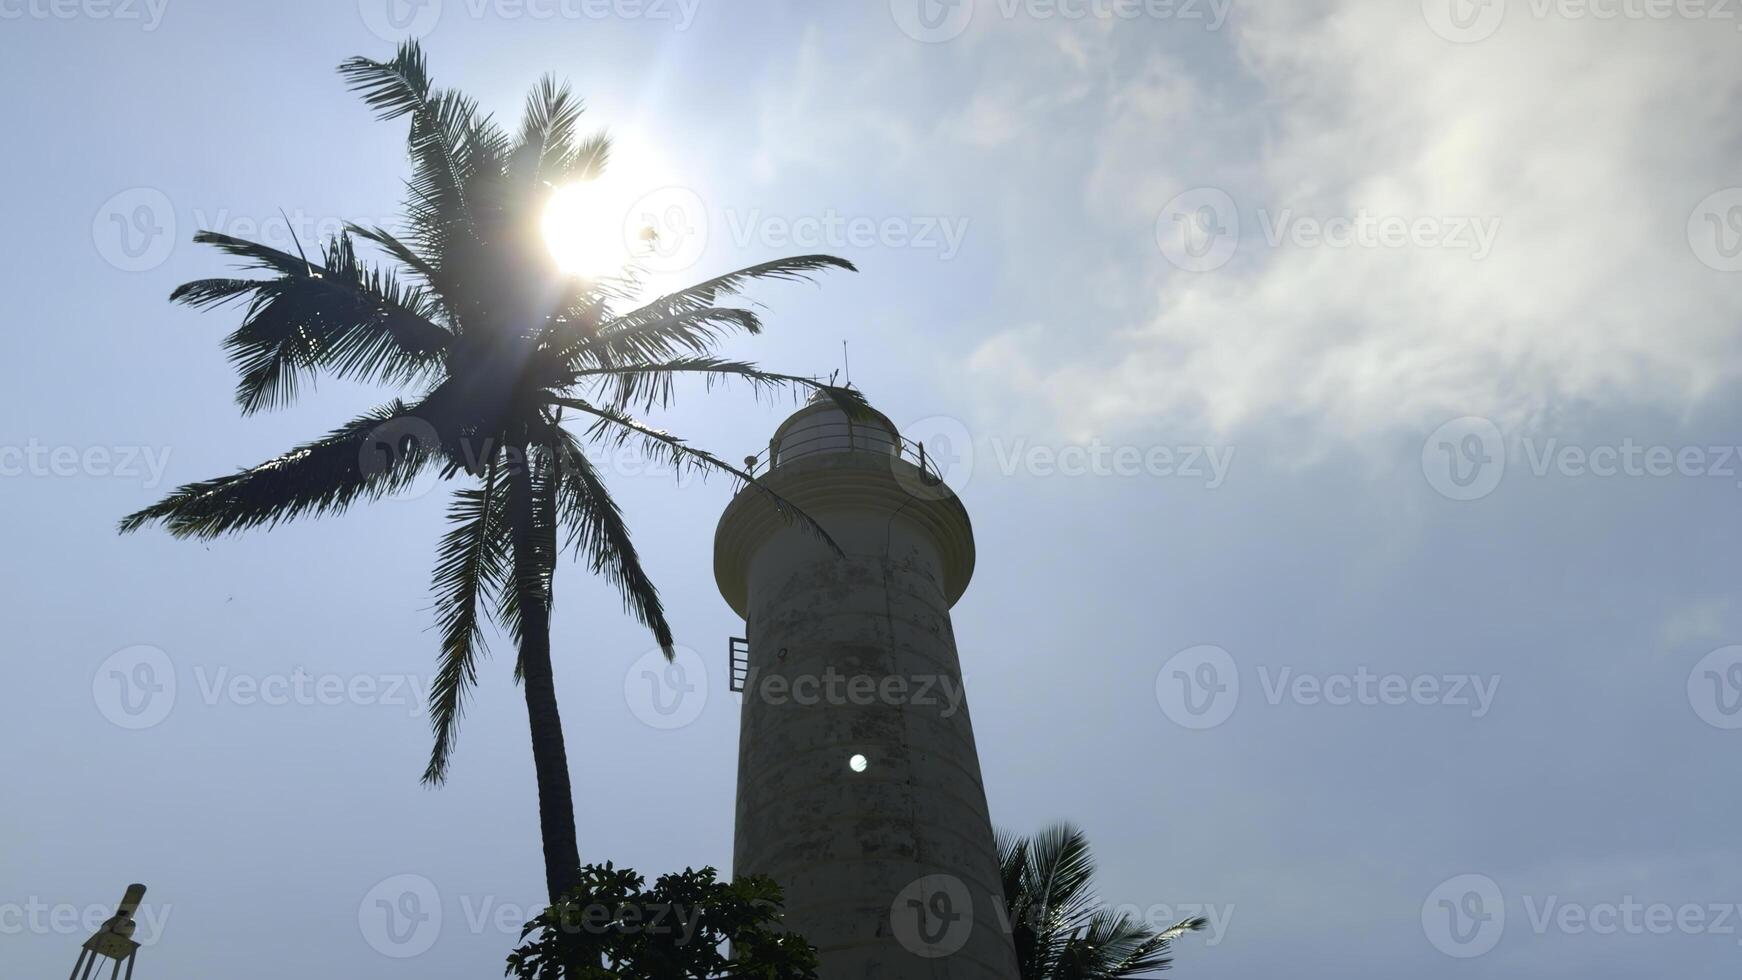 Low angle view of a beautiful tower and a palm tree against blue cloudy sky. Action. White lighthouse and palm tree. photo